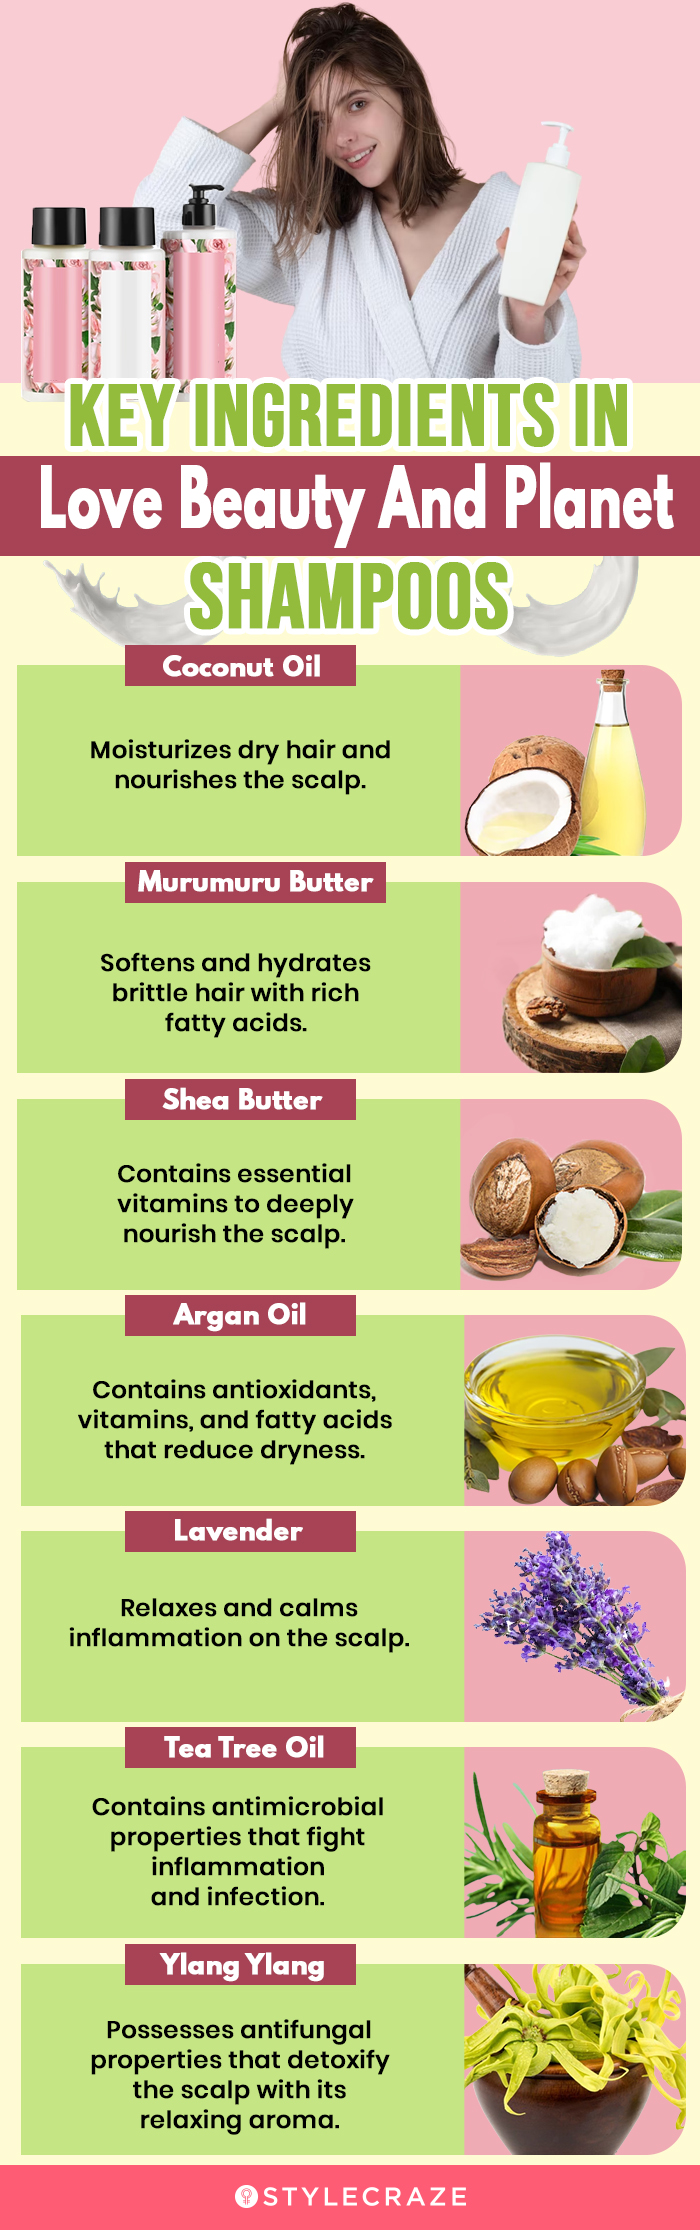 Key Ingredients In Love Beauty And Planet Shampoos (infographic)